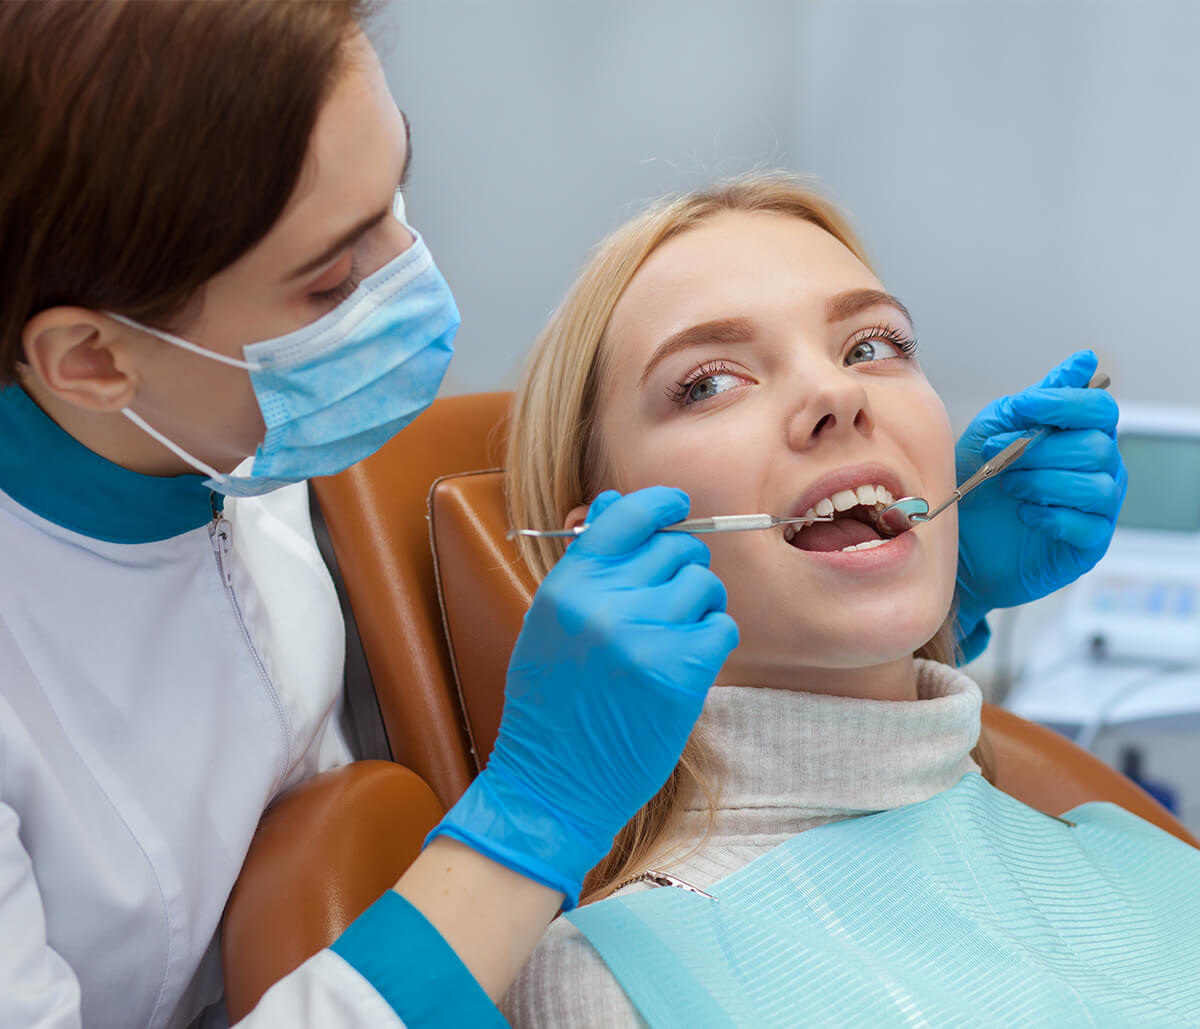 What Are the Benefits of Visiting an East River Dentist?